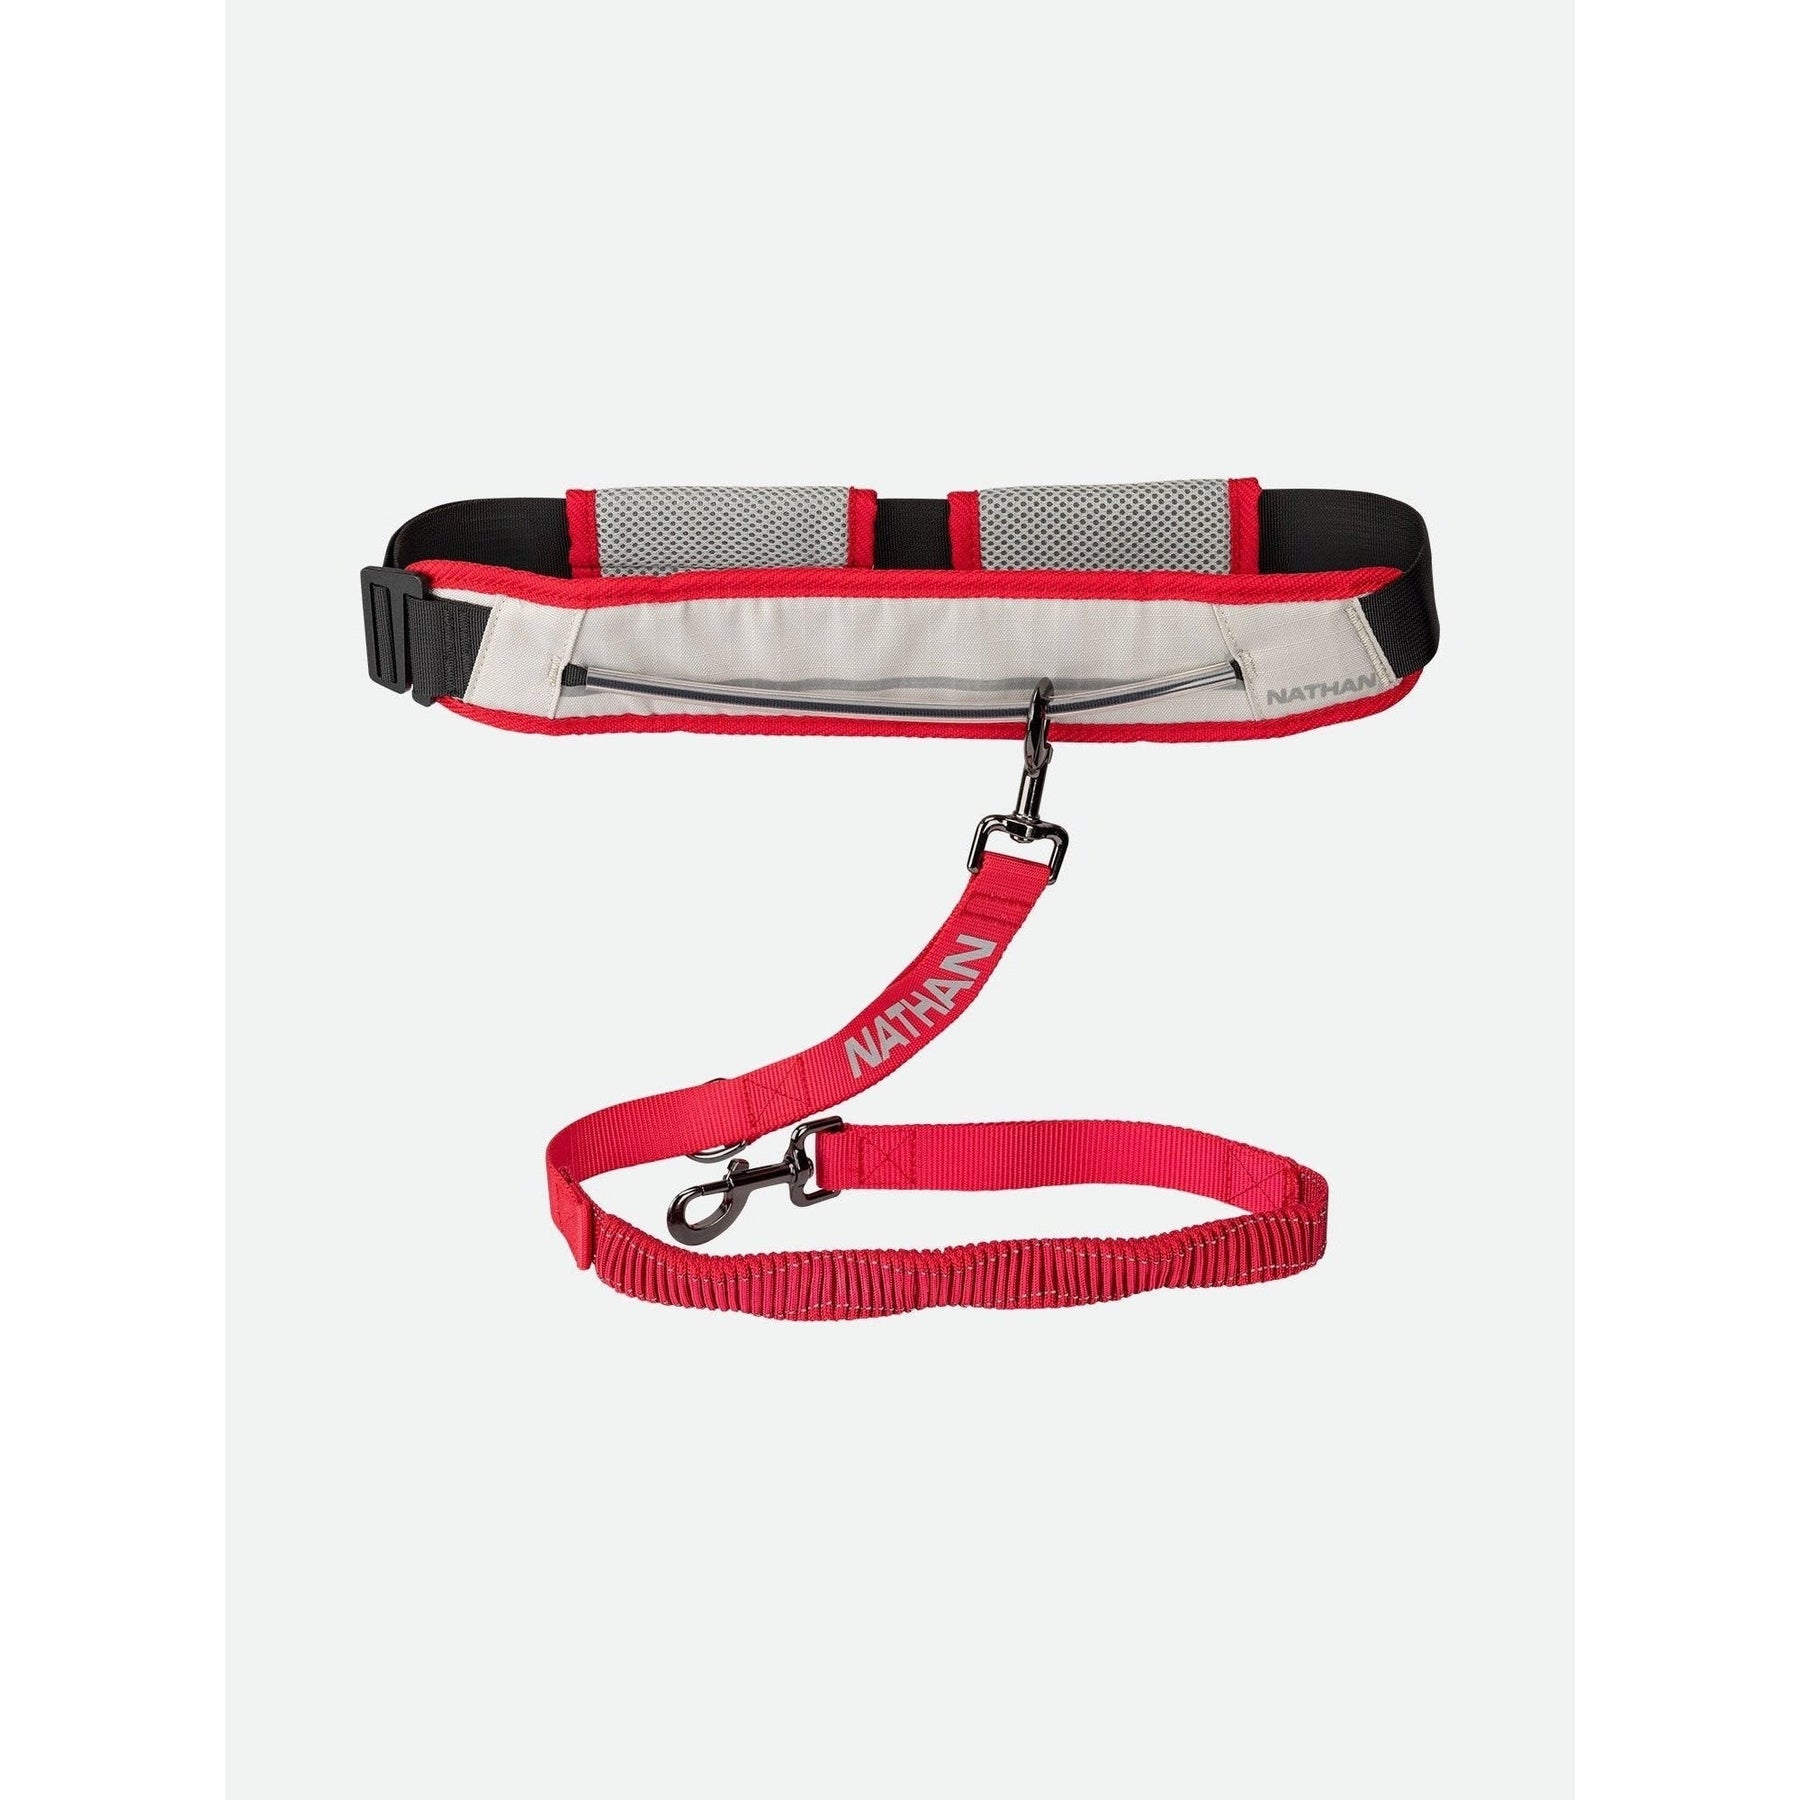 Nathan-Nathan Runner's Belt with Leash-Pacers Running